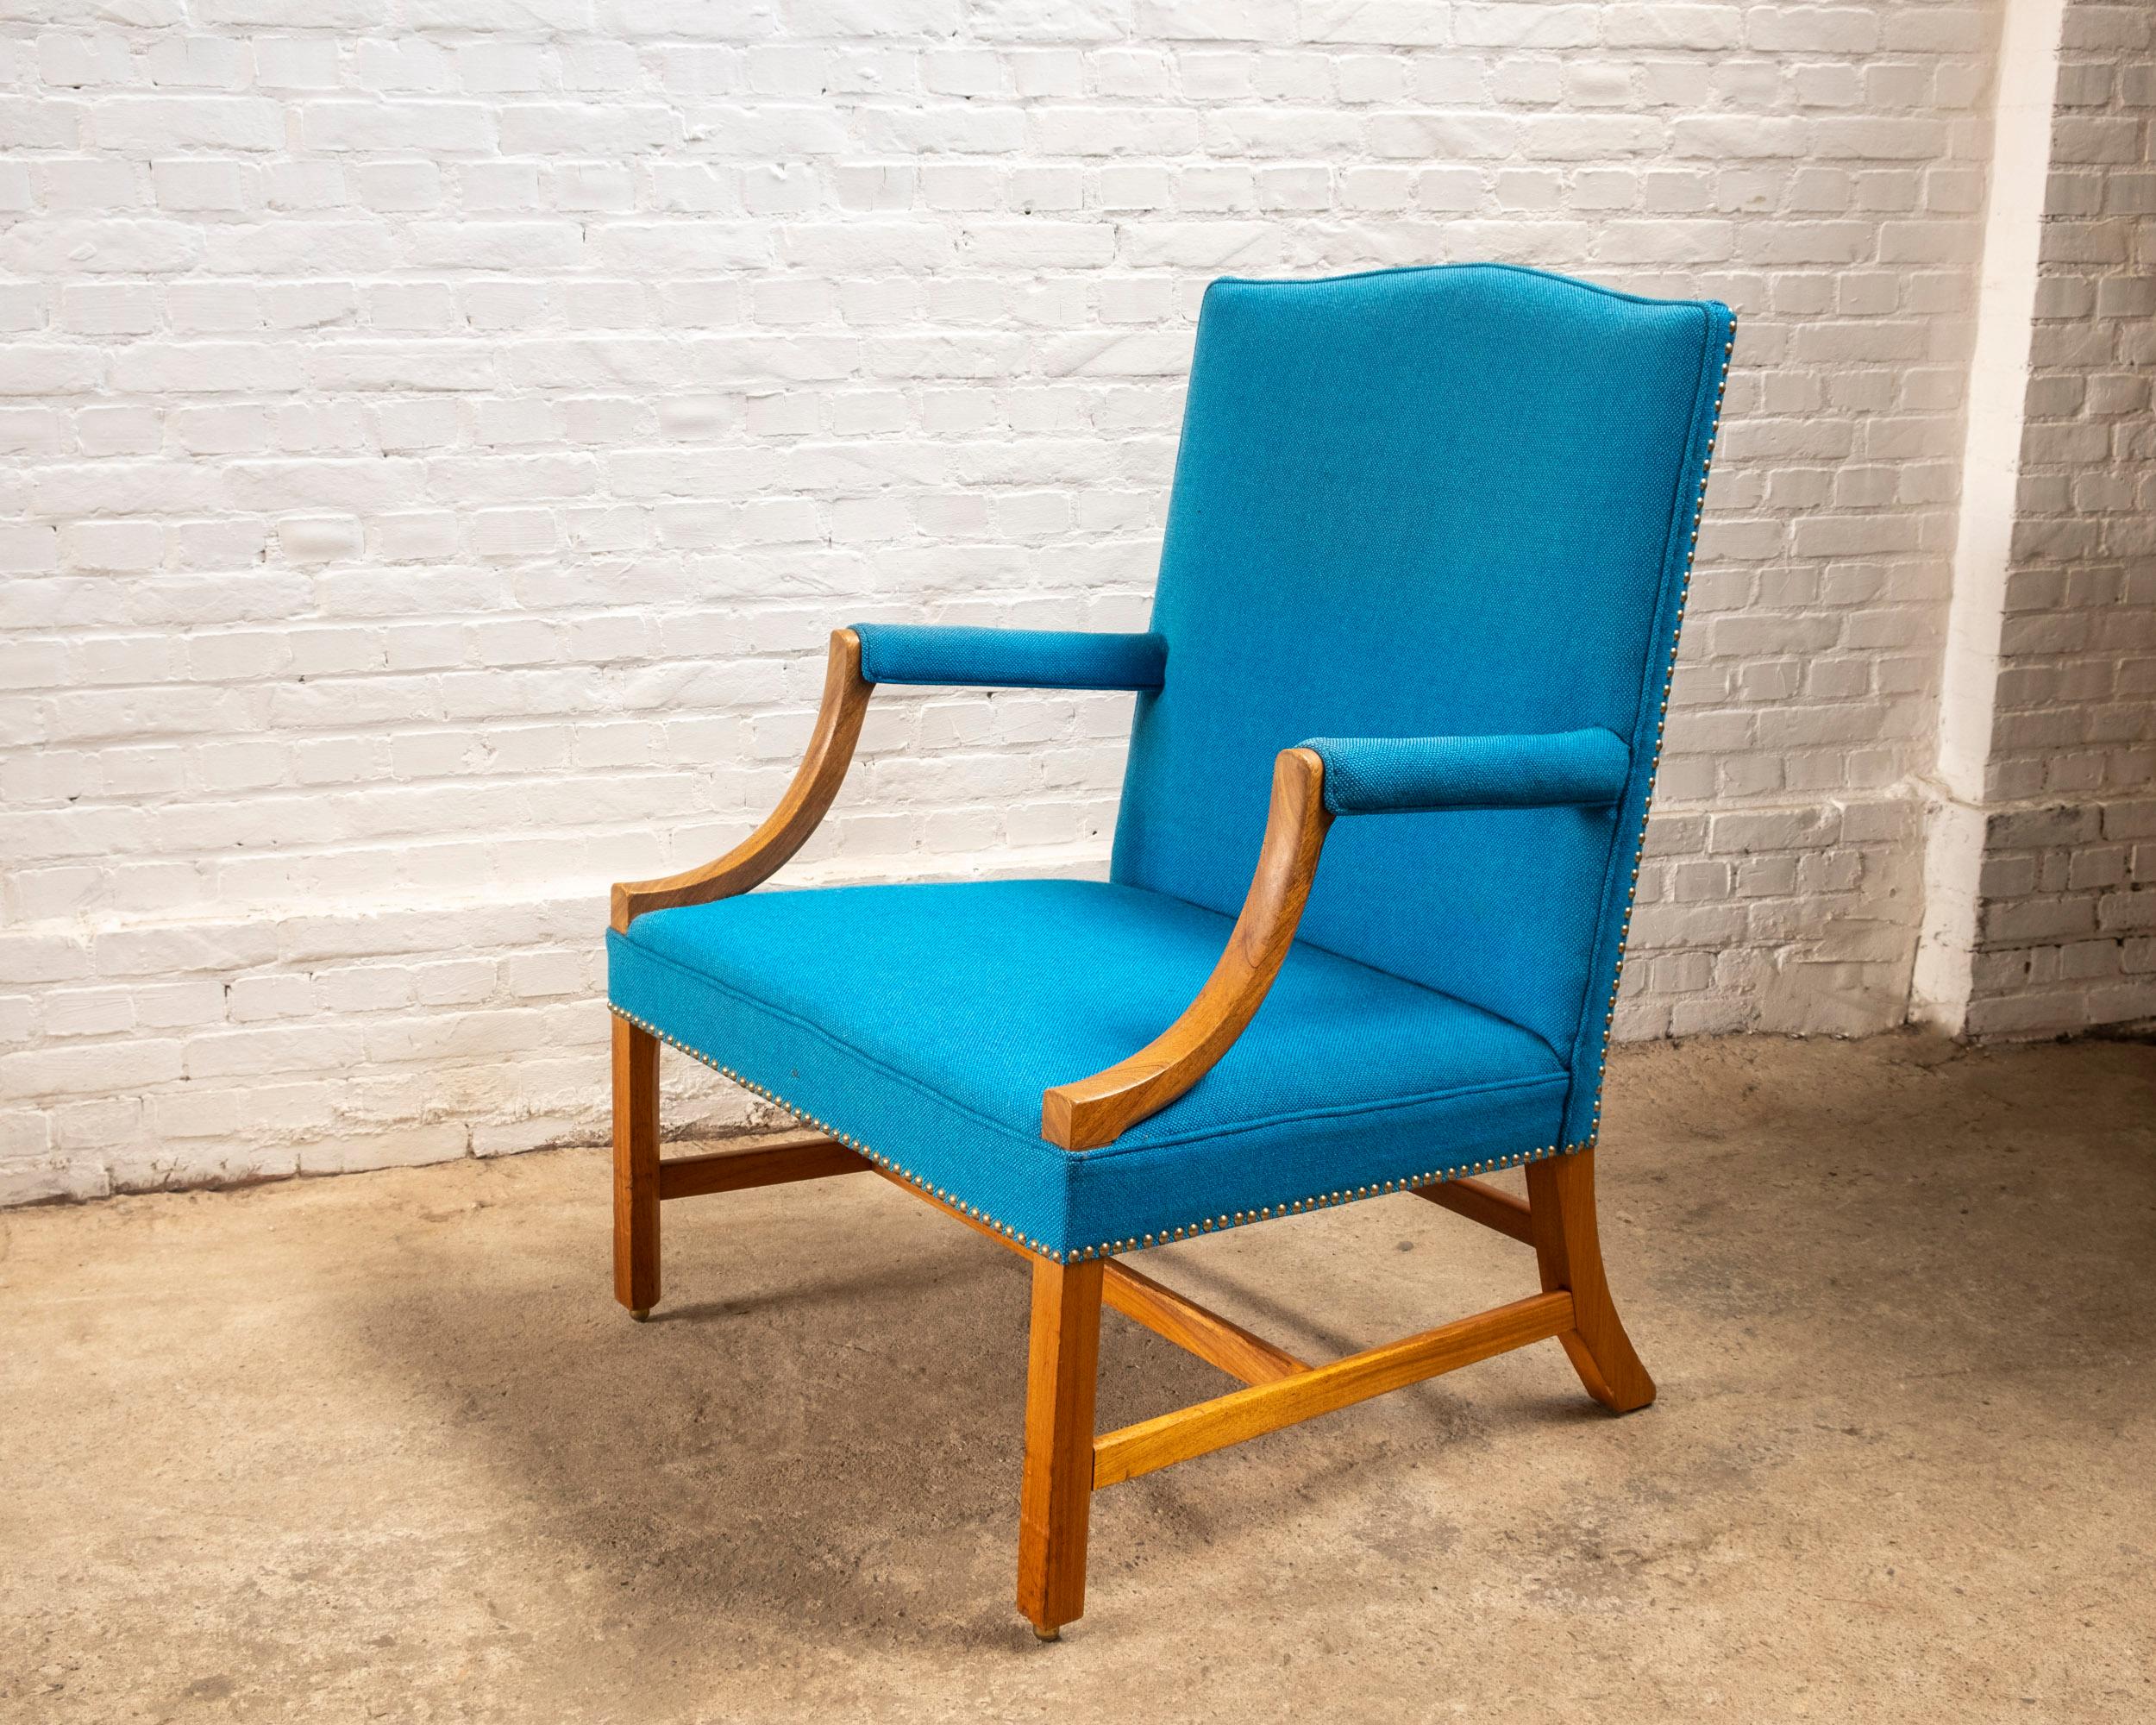 Danish Ole Wanscher Attributed to: Lounge Chair and Ottoman, 1940s, Denmark For Sale